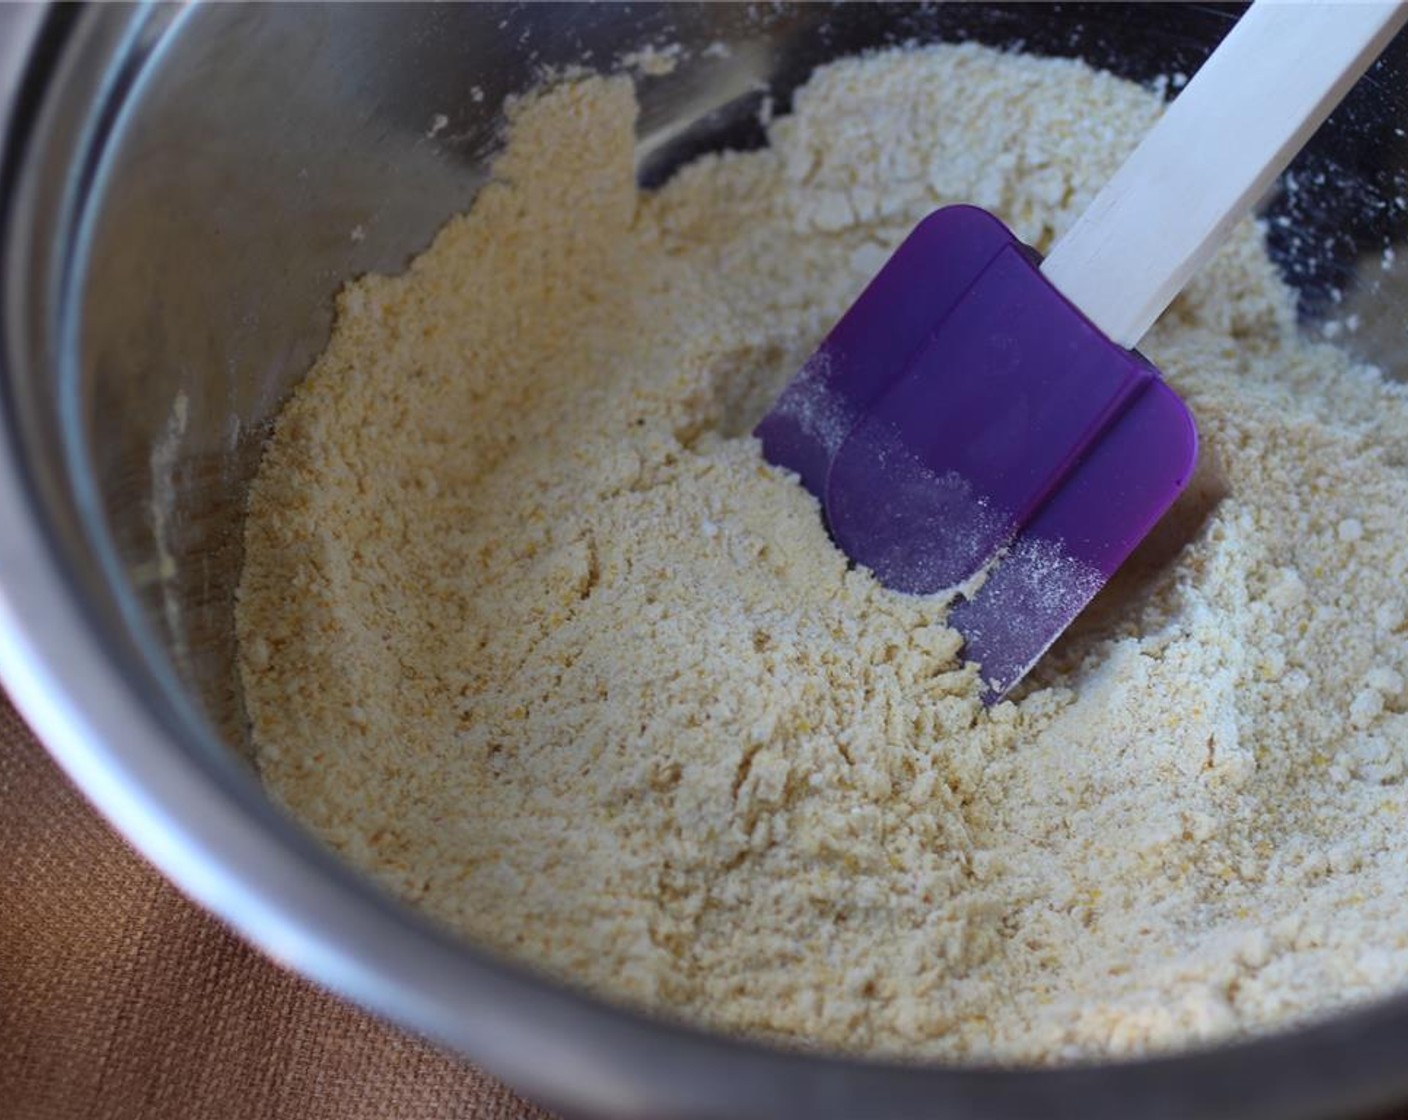 step 2 Mix the dry ingredients: Corn Flour (1 cup), Cornmeal (1 cup) and Baking Powder (1/2 Tbsp). In a separate bowl, mix the wet ingredients: Canola Oil (1/4 cup), Maple Syrup (2 Tbsp), and Non-Dairy Milk (1 cup).